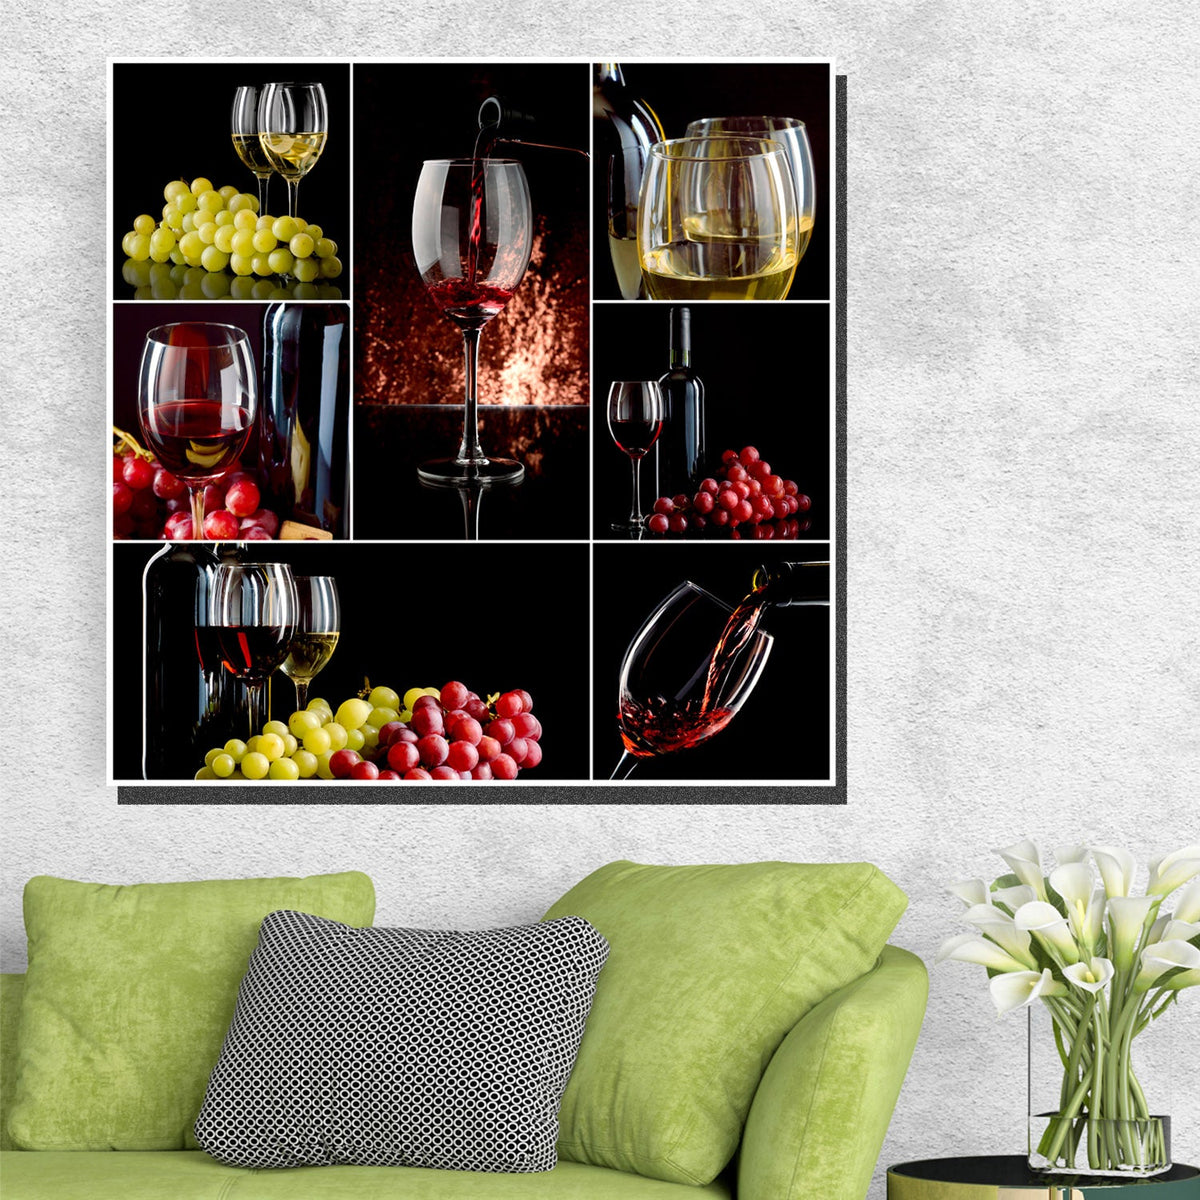 https://cdn.shopify.com/s/files/1/0387/9986/8044/products/WineandGrapesCollageCanvasArtprintStretched-3.jpg